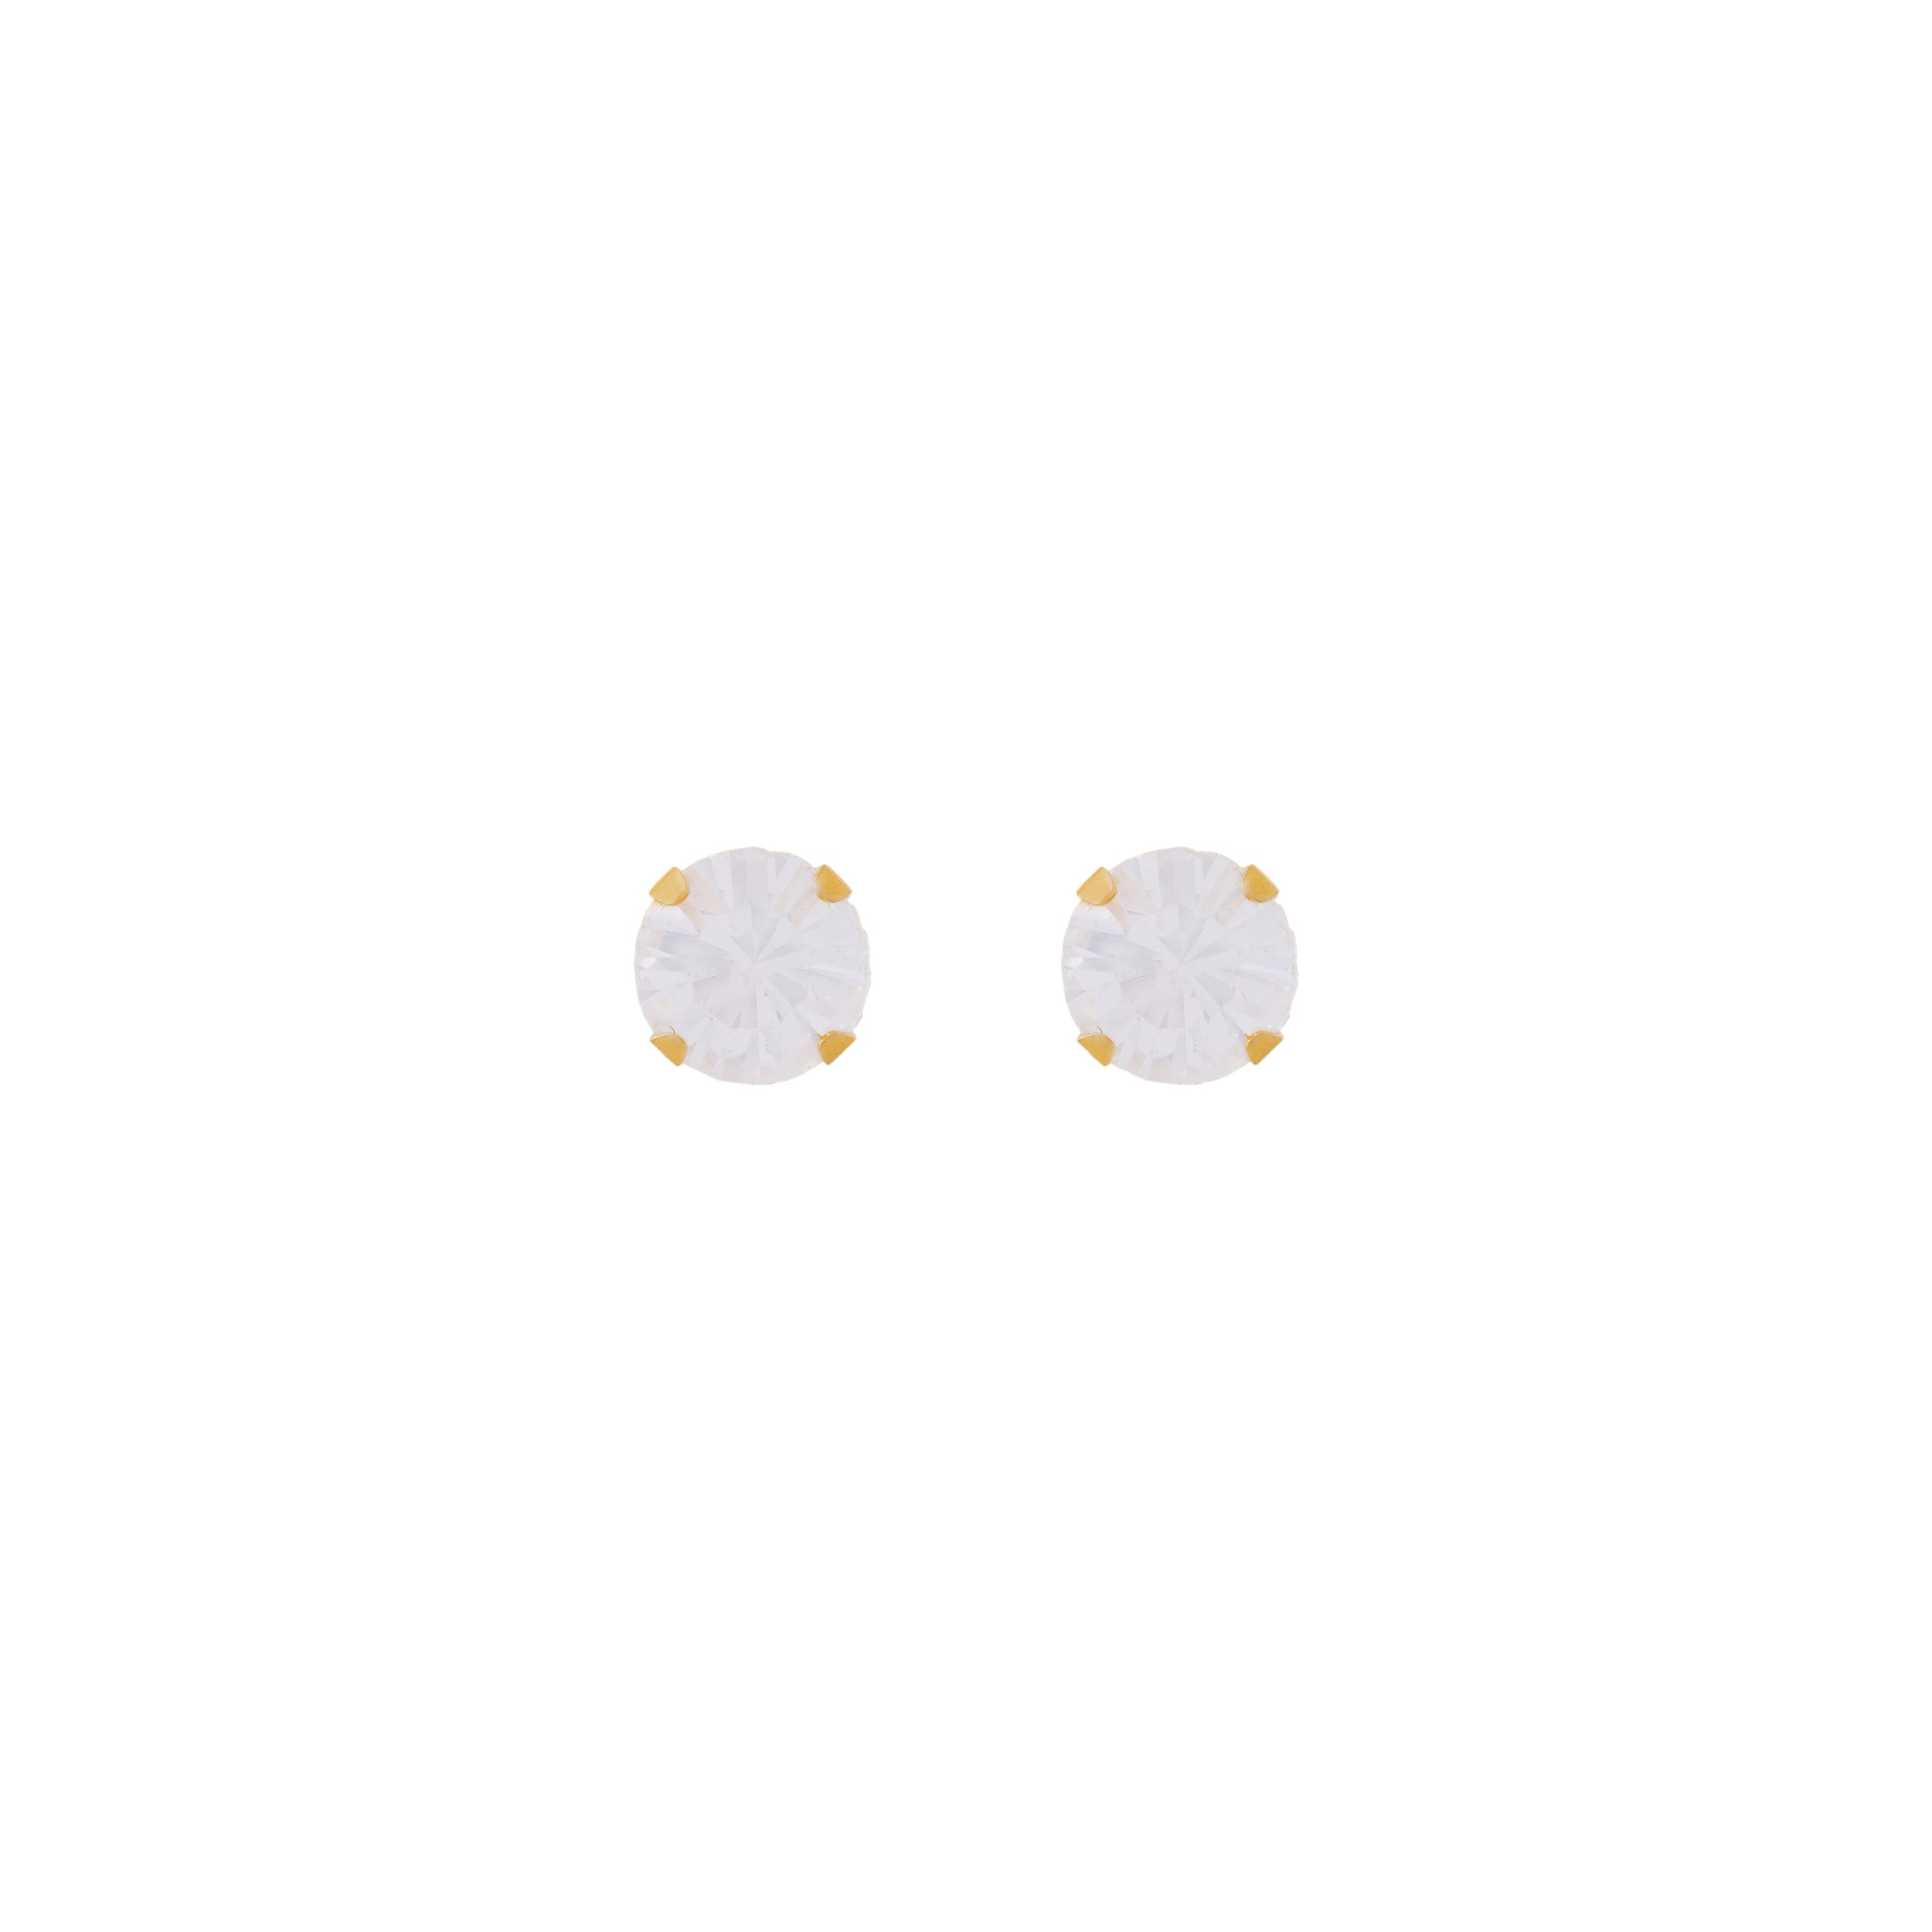 5MM Apr Crystal 24K Pure Gold Plated Ear Stud | MADE IN USA | Ideal for everyday wear